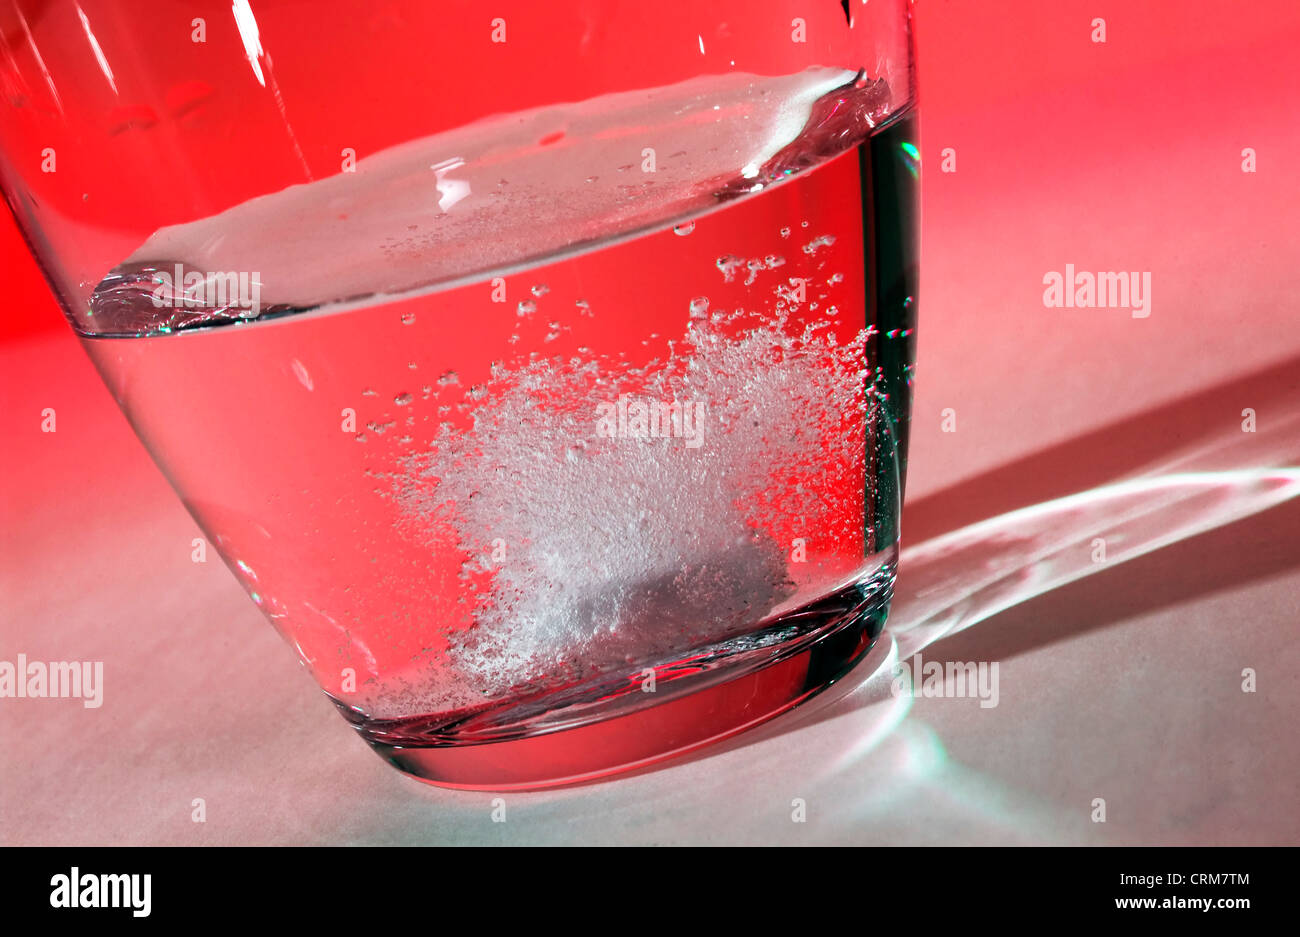 Tablet effervescing as it dissolves in a glass of water against a red background. Stock Photo